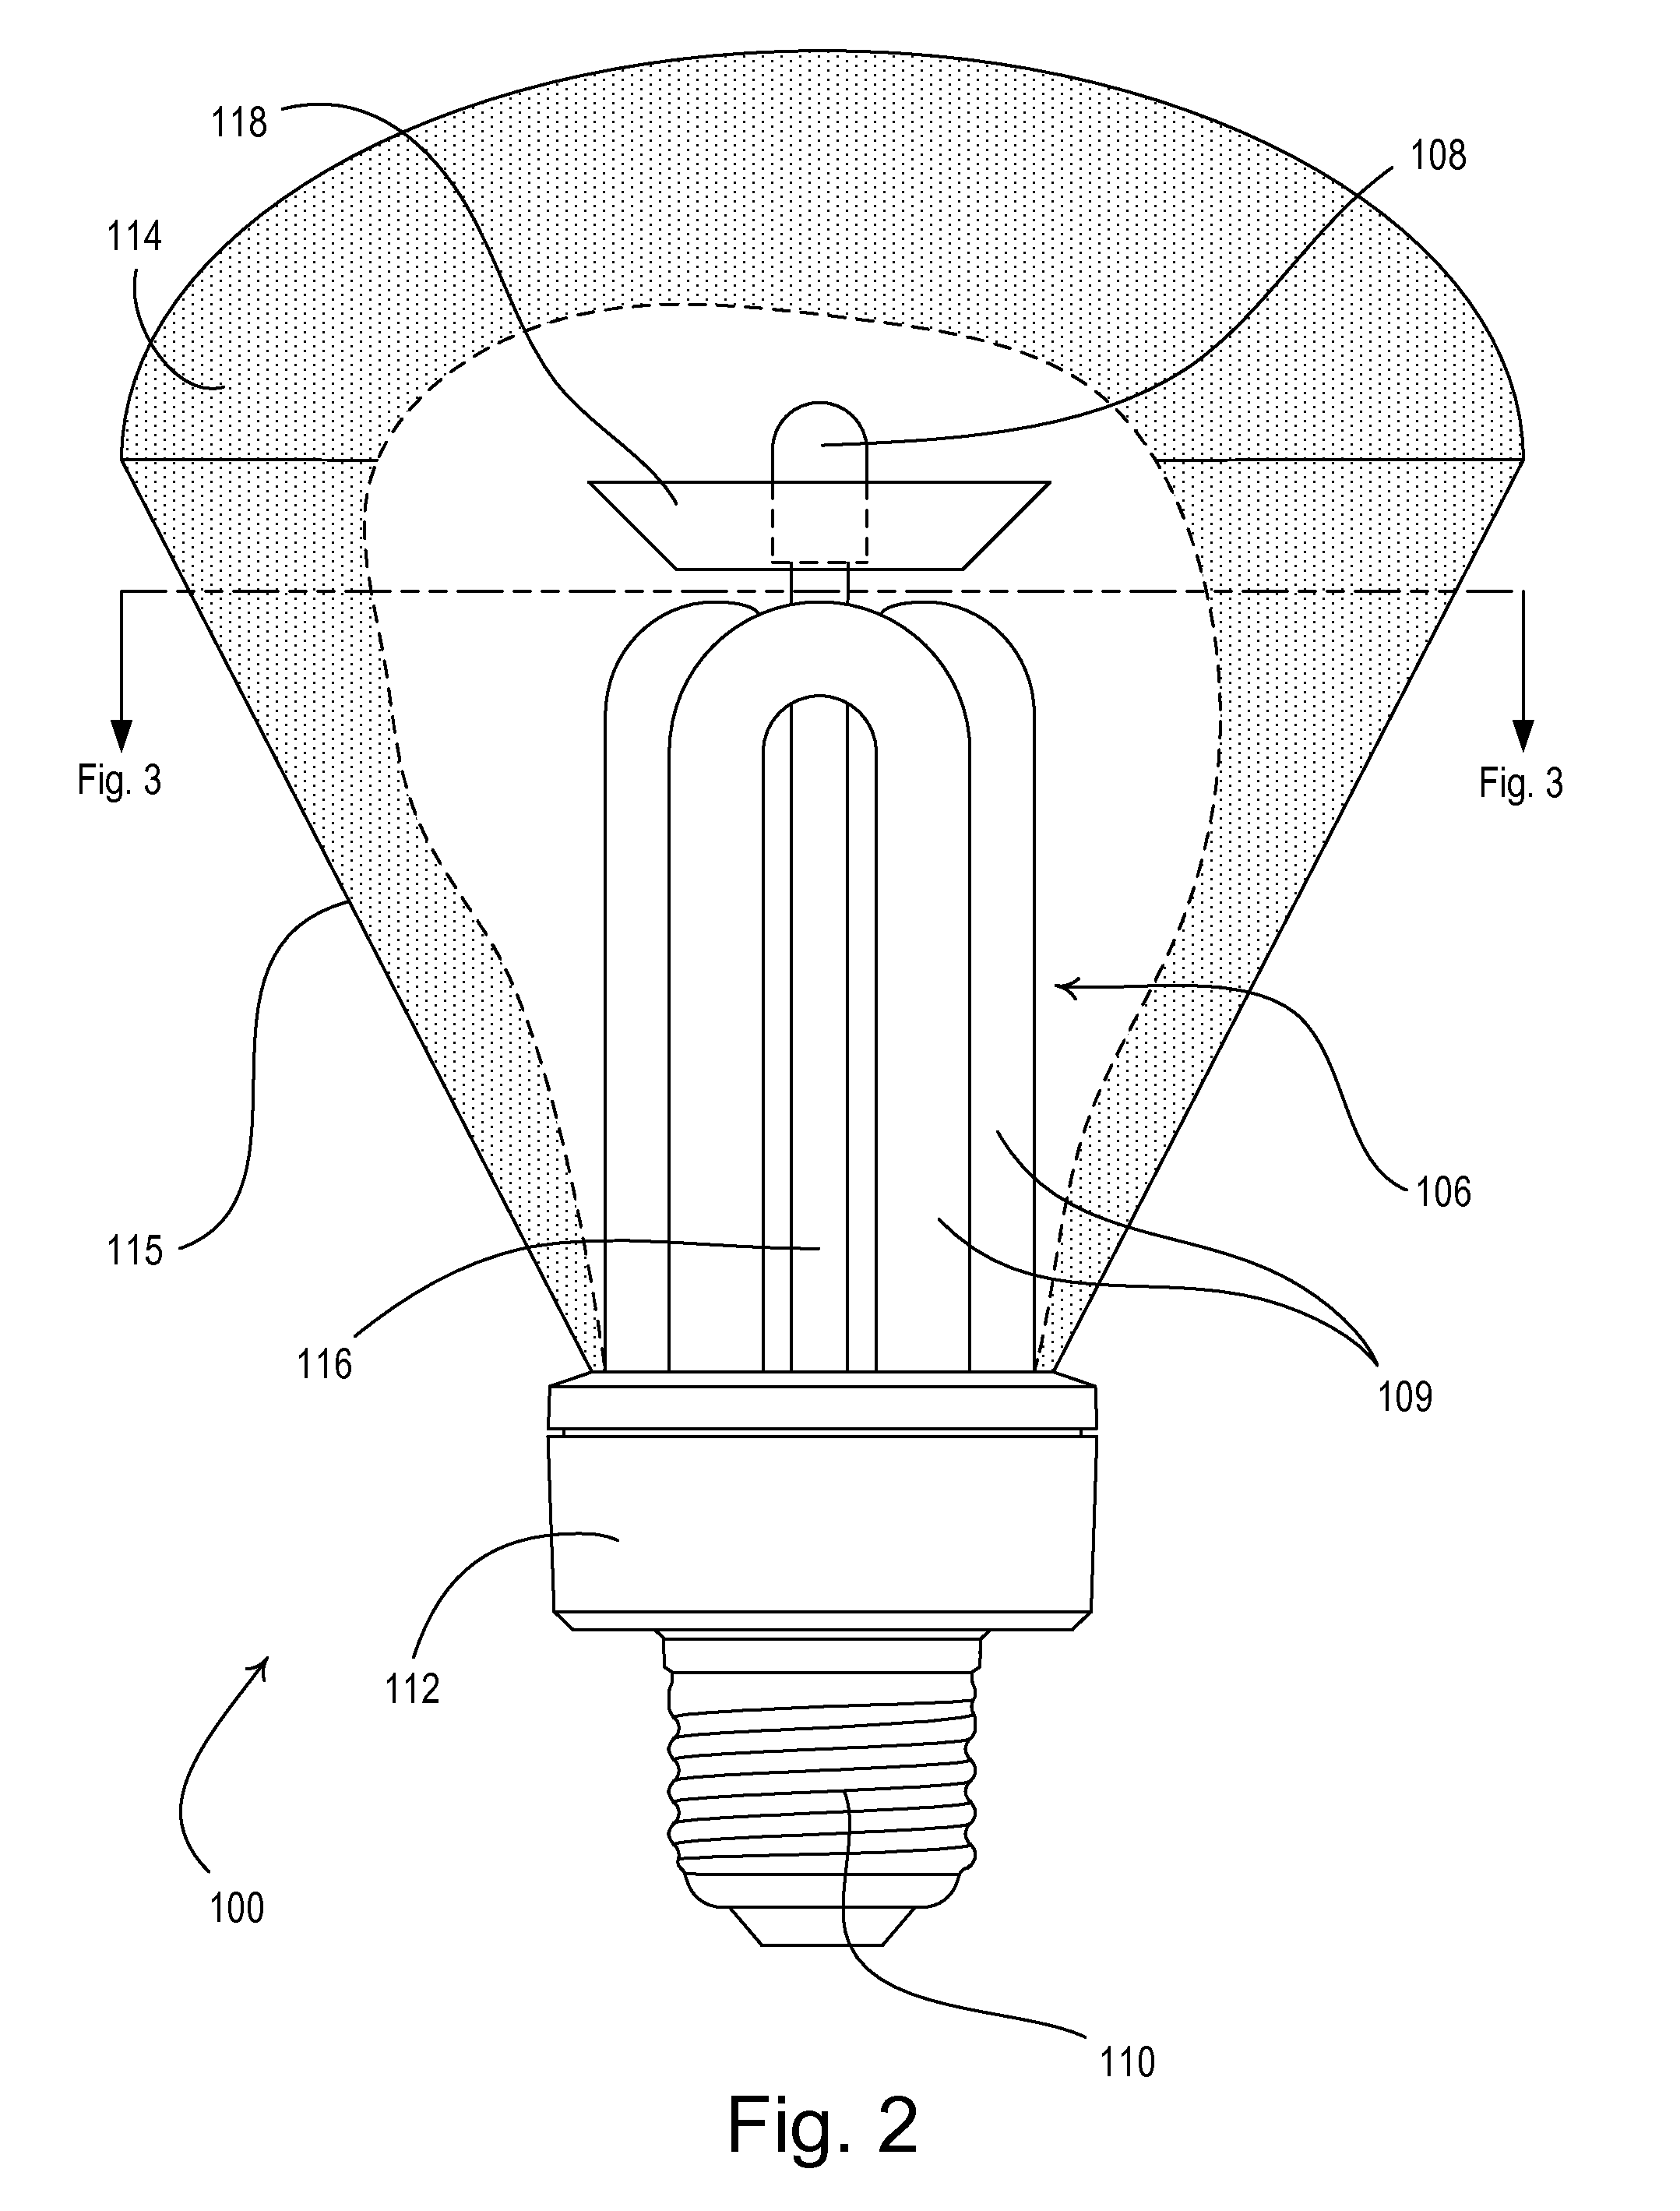 Method of Striking a Lamp in an Electronic Dimming Ballast Circuit